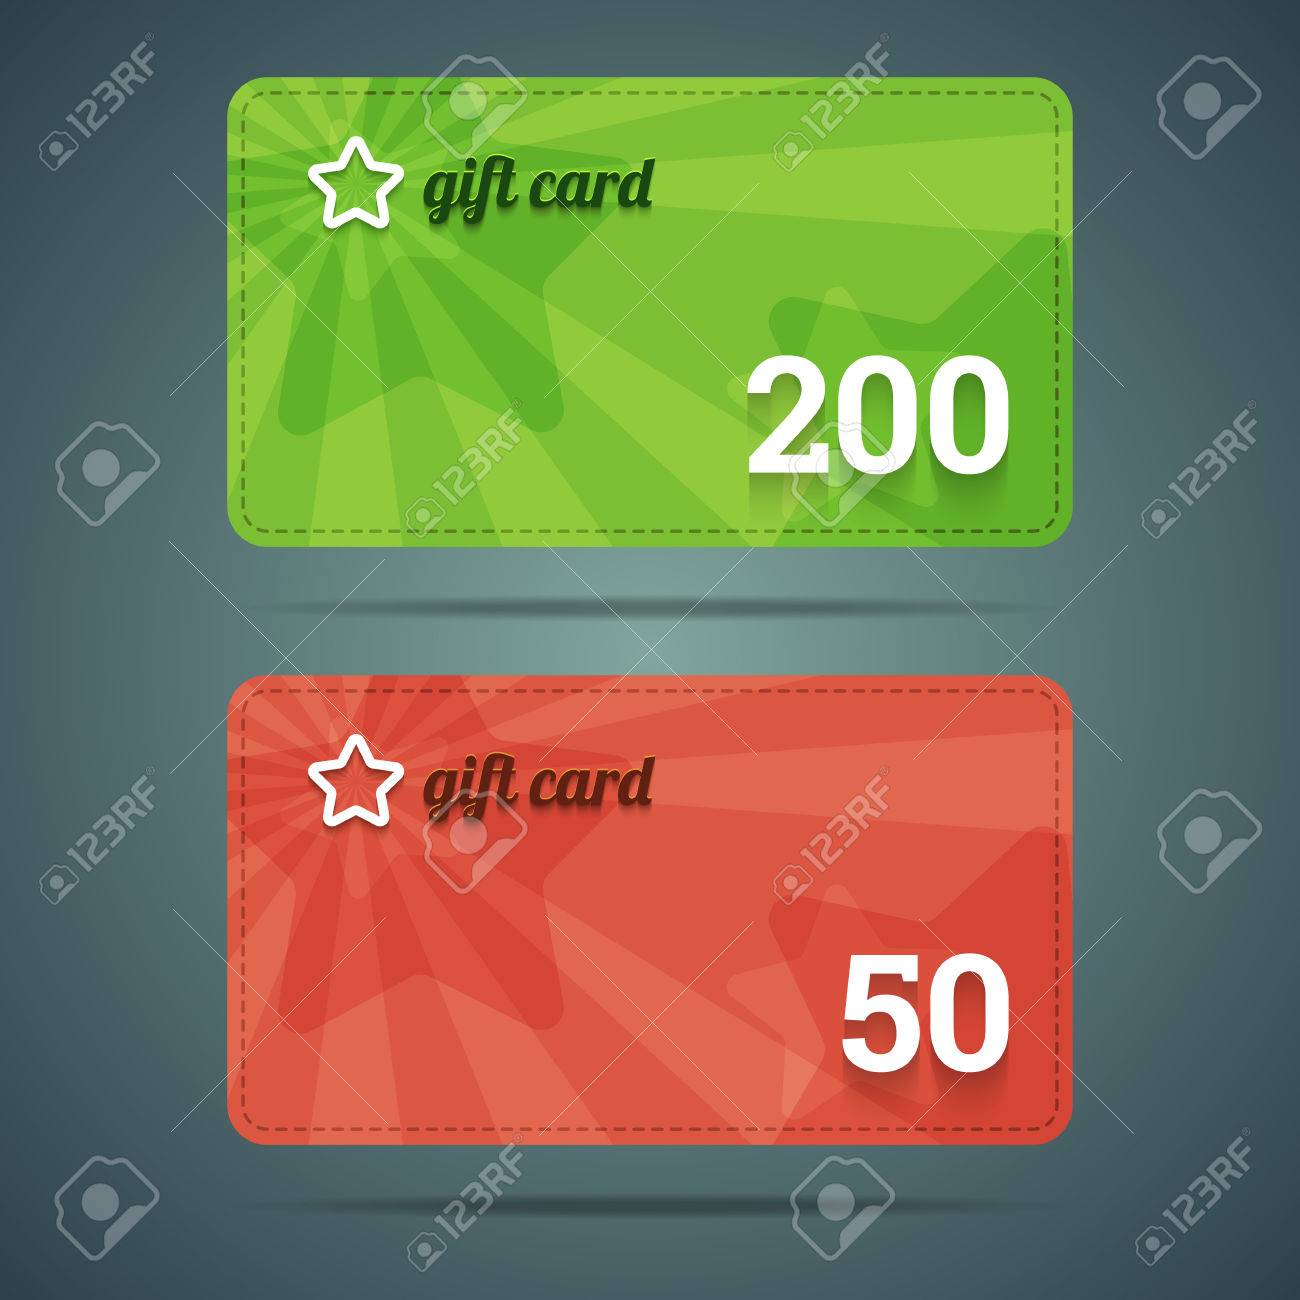 34194859-gift-card-templates-vector-illustration-in-eps10-